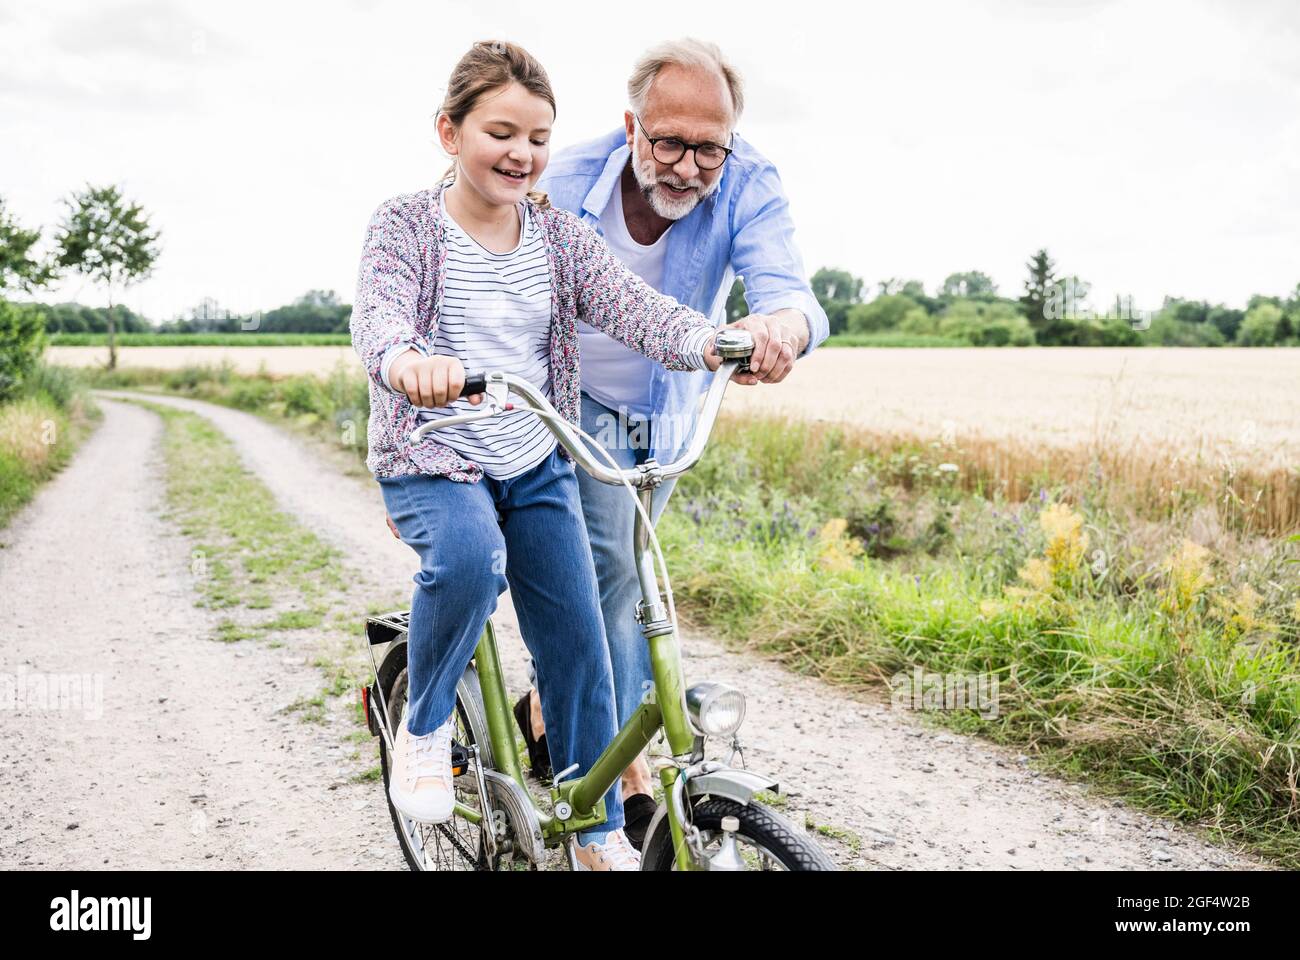 Grandfather teaching cycling to granddaughter on dirt road Stock Photo